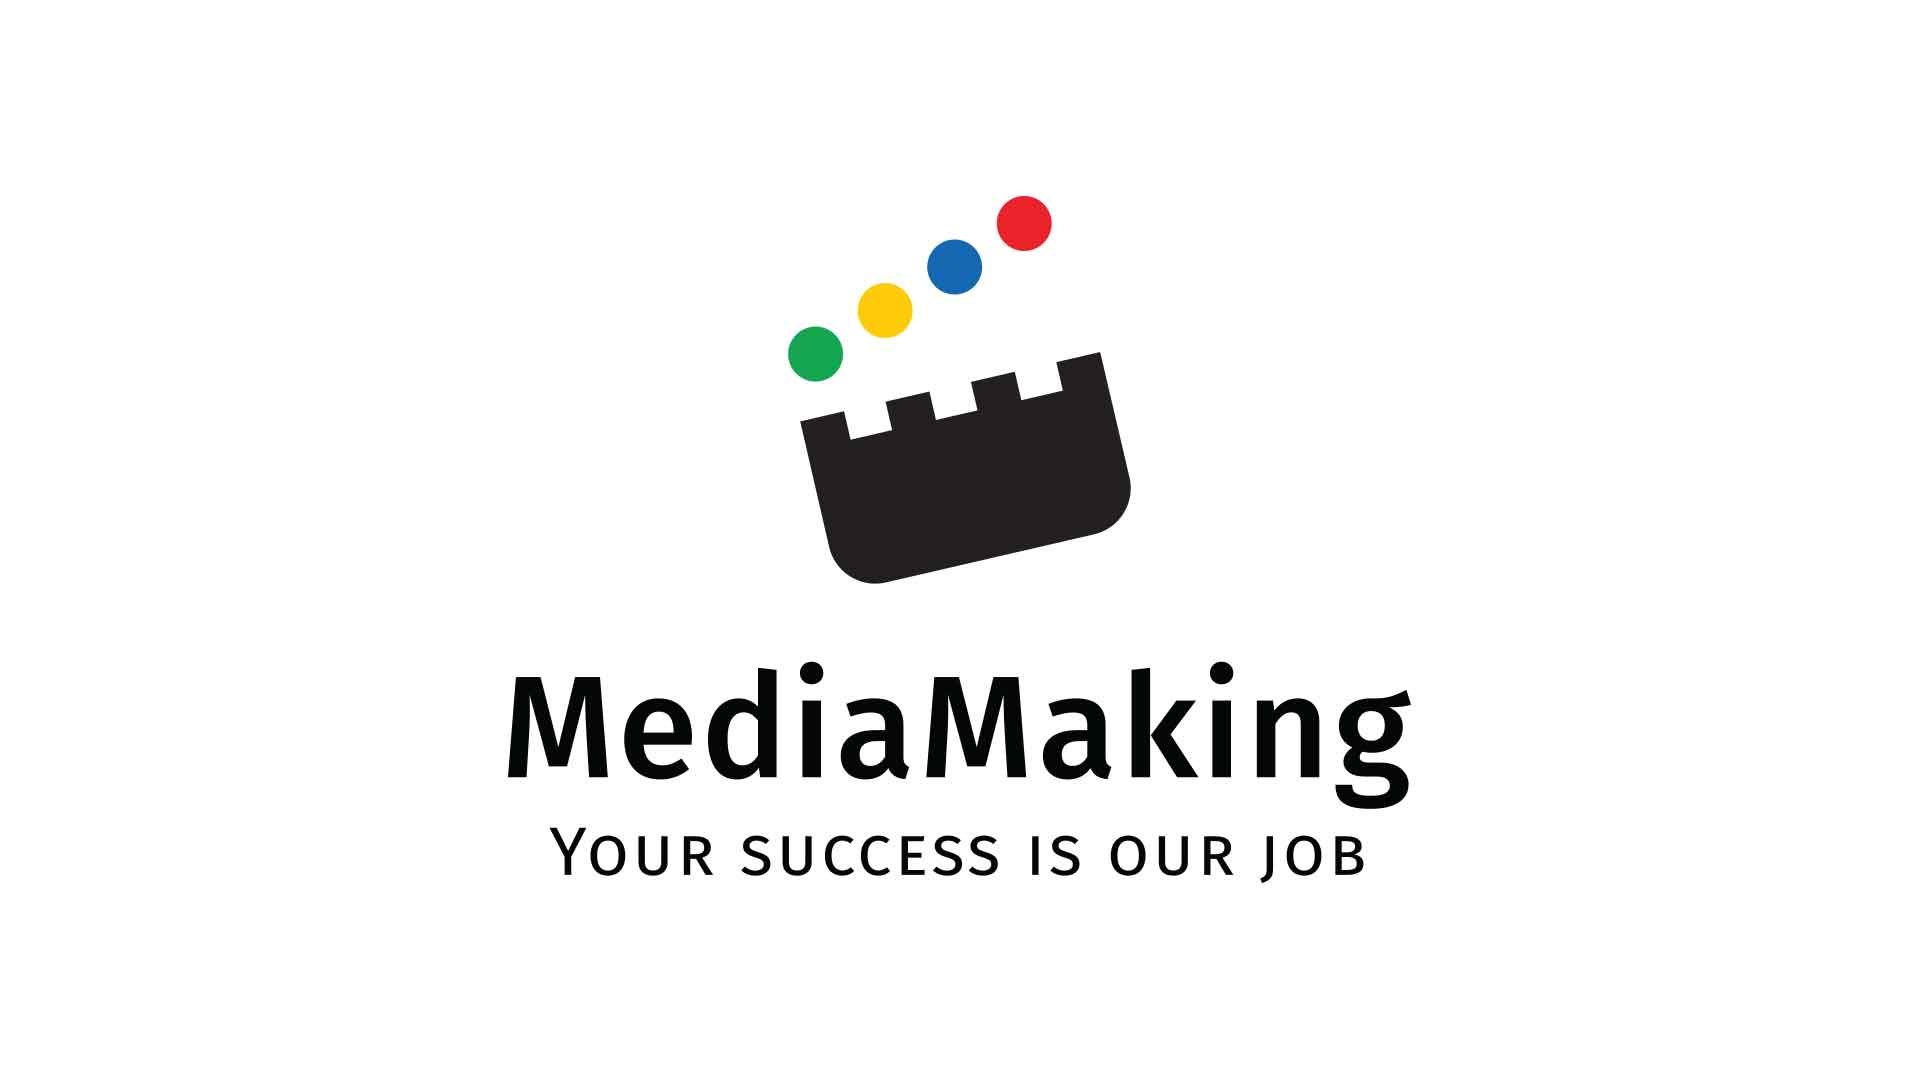 Home page - MediaMaking